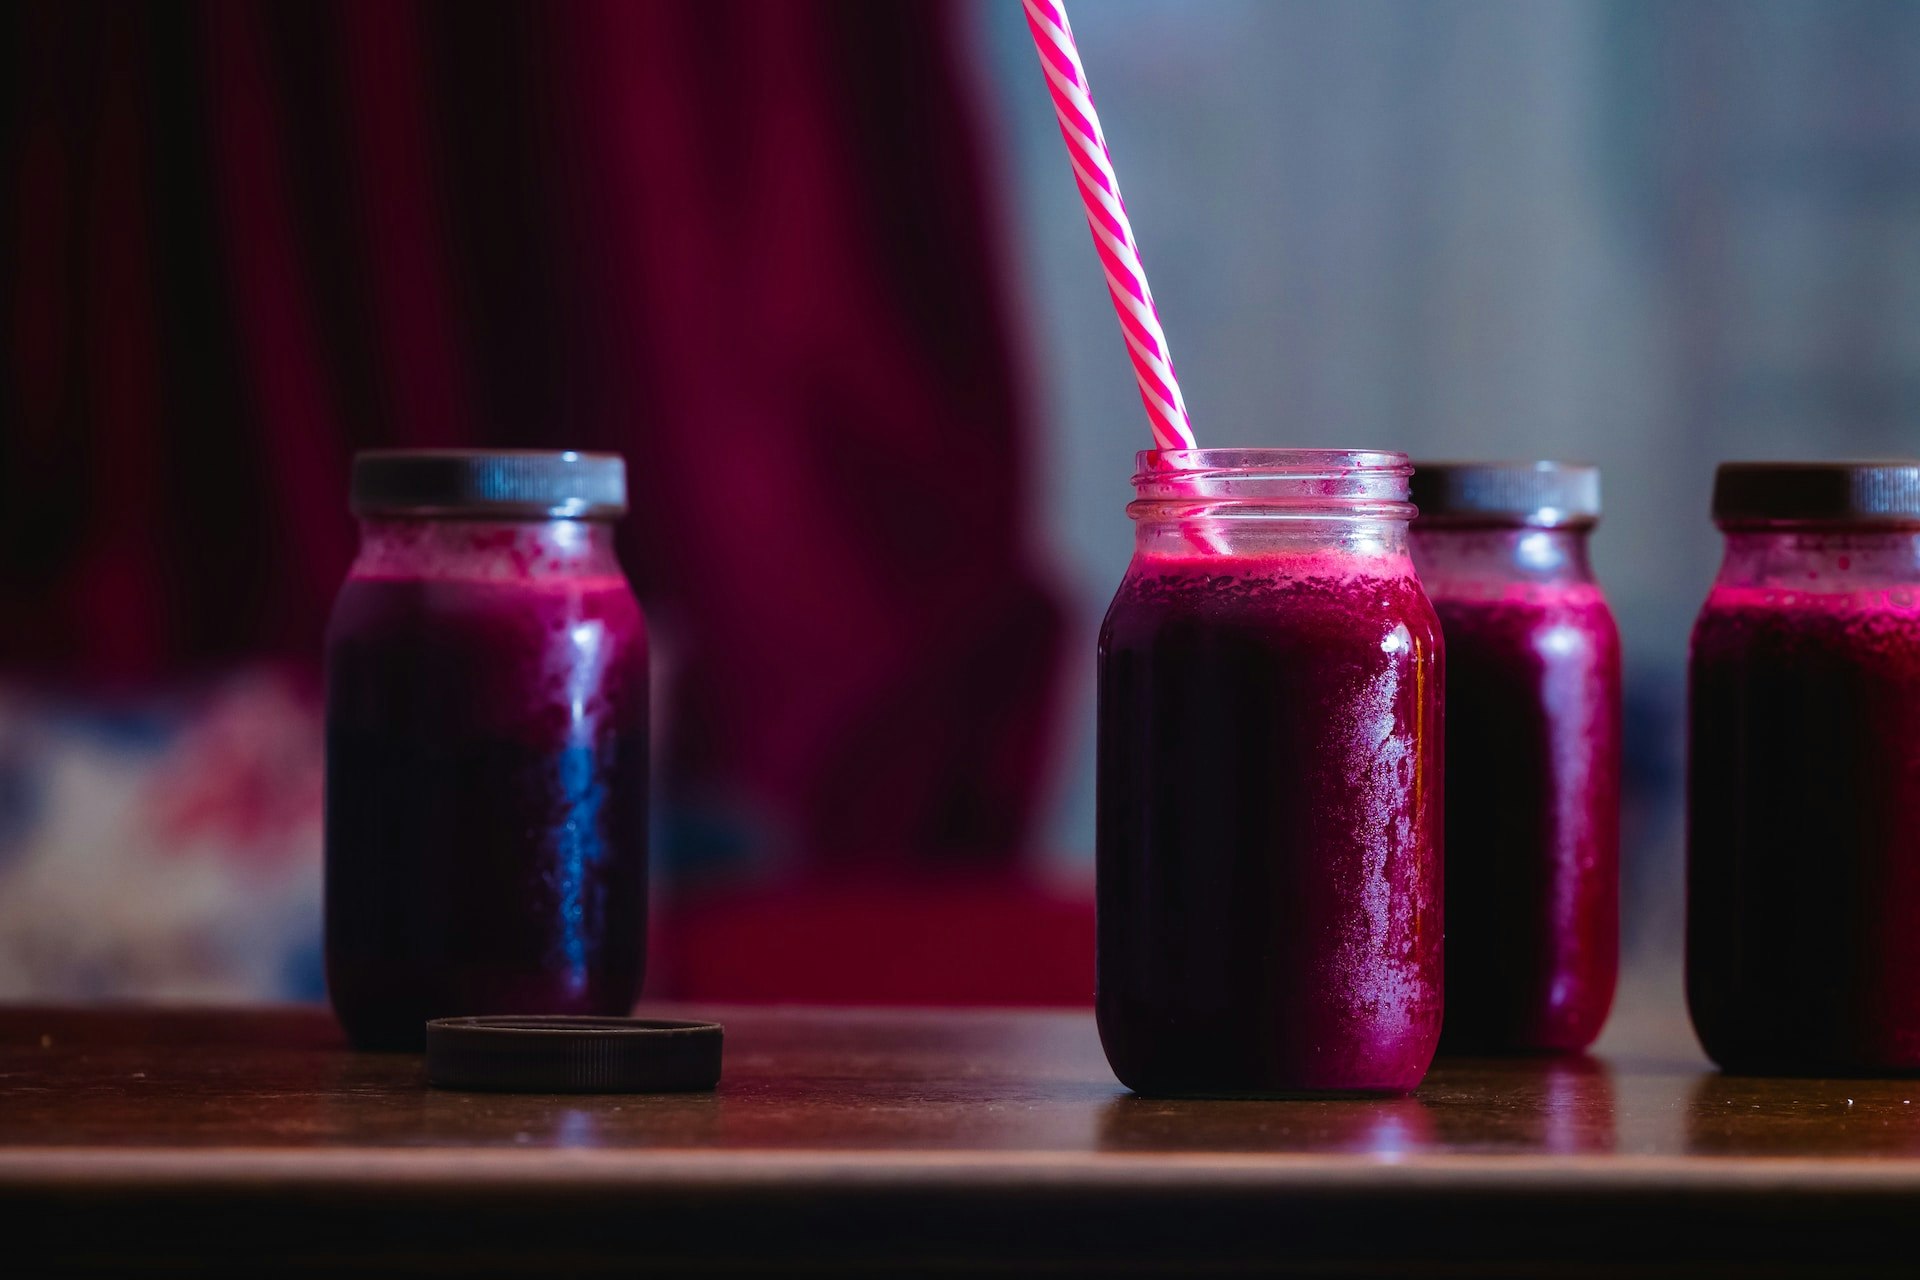 Does Beet Juice Have Sugar? How Much?